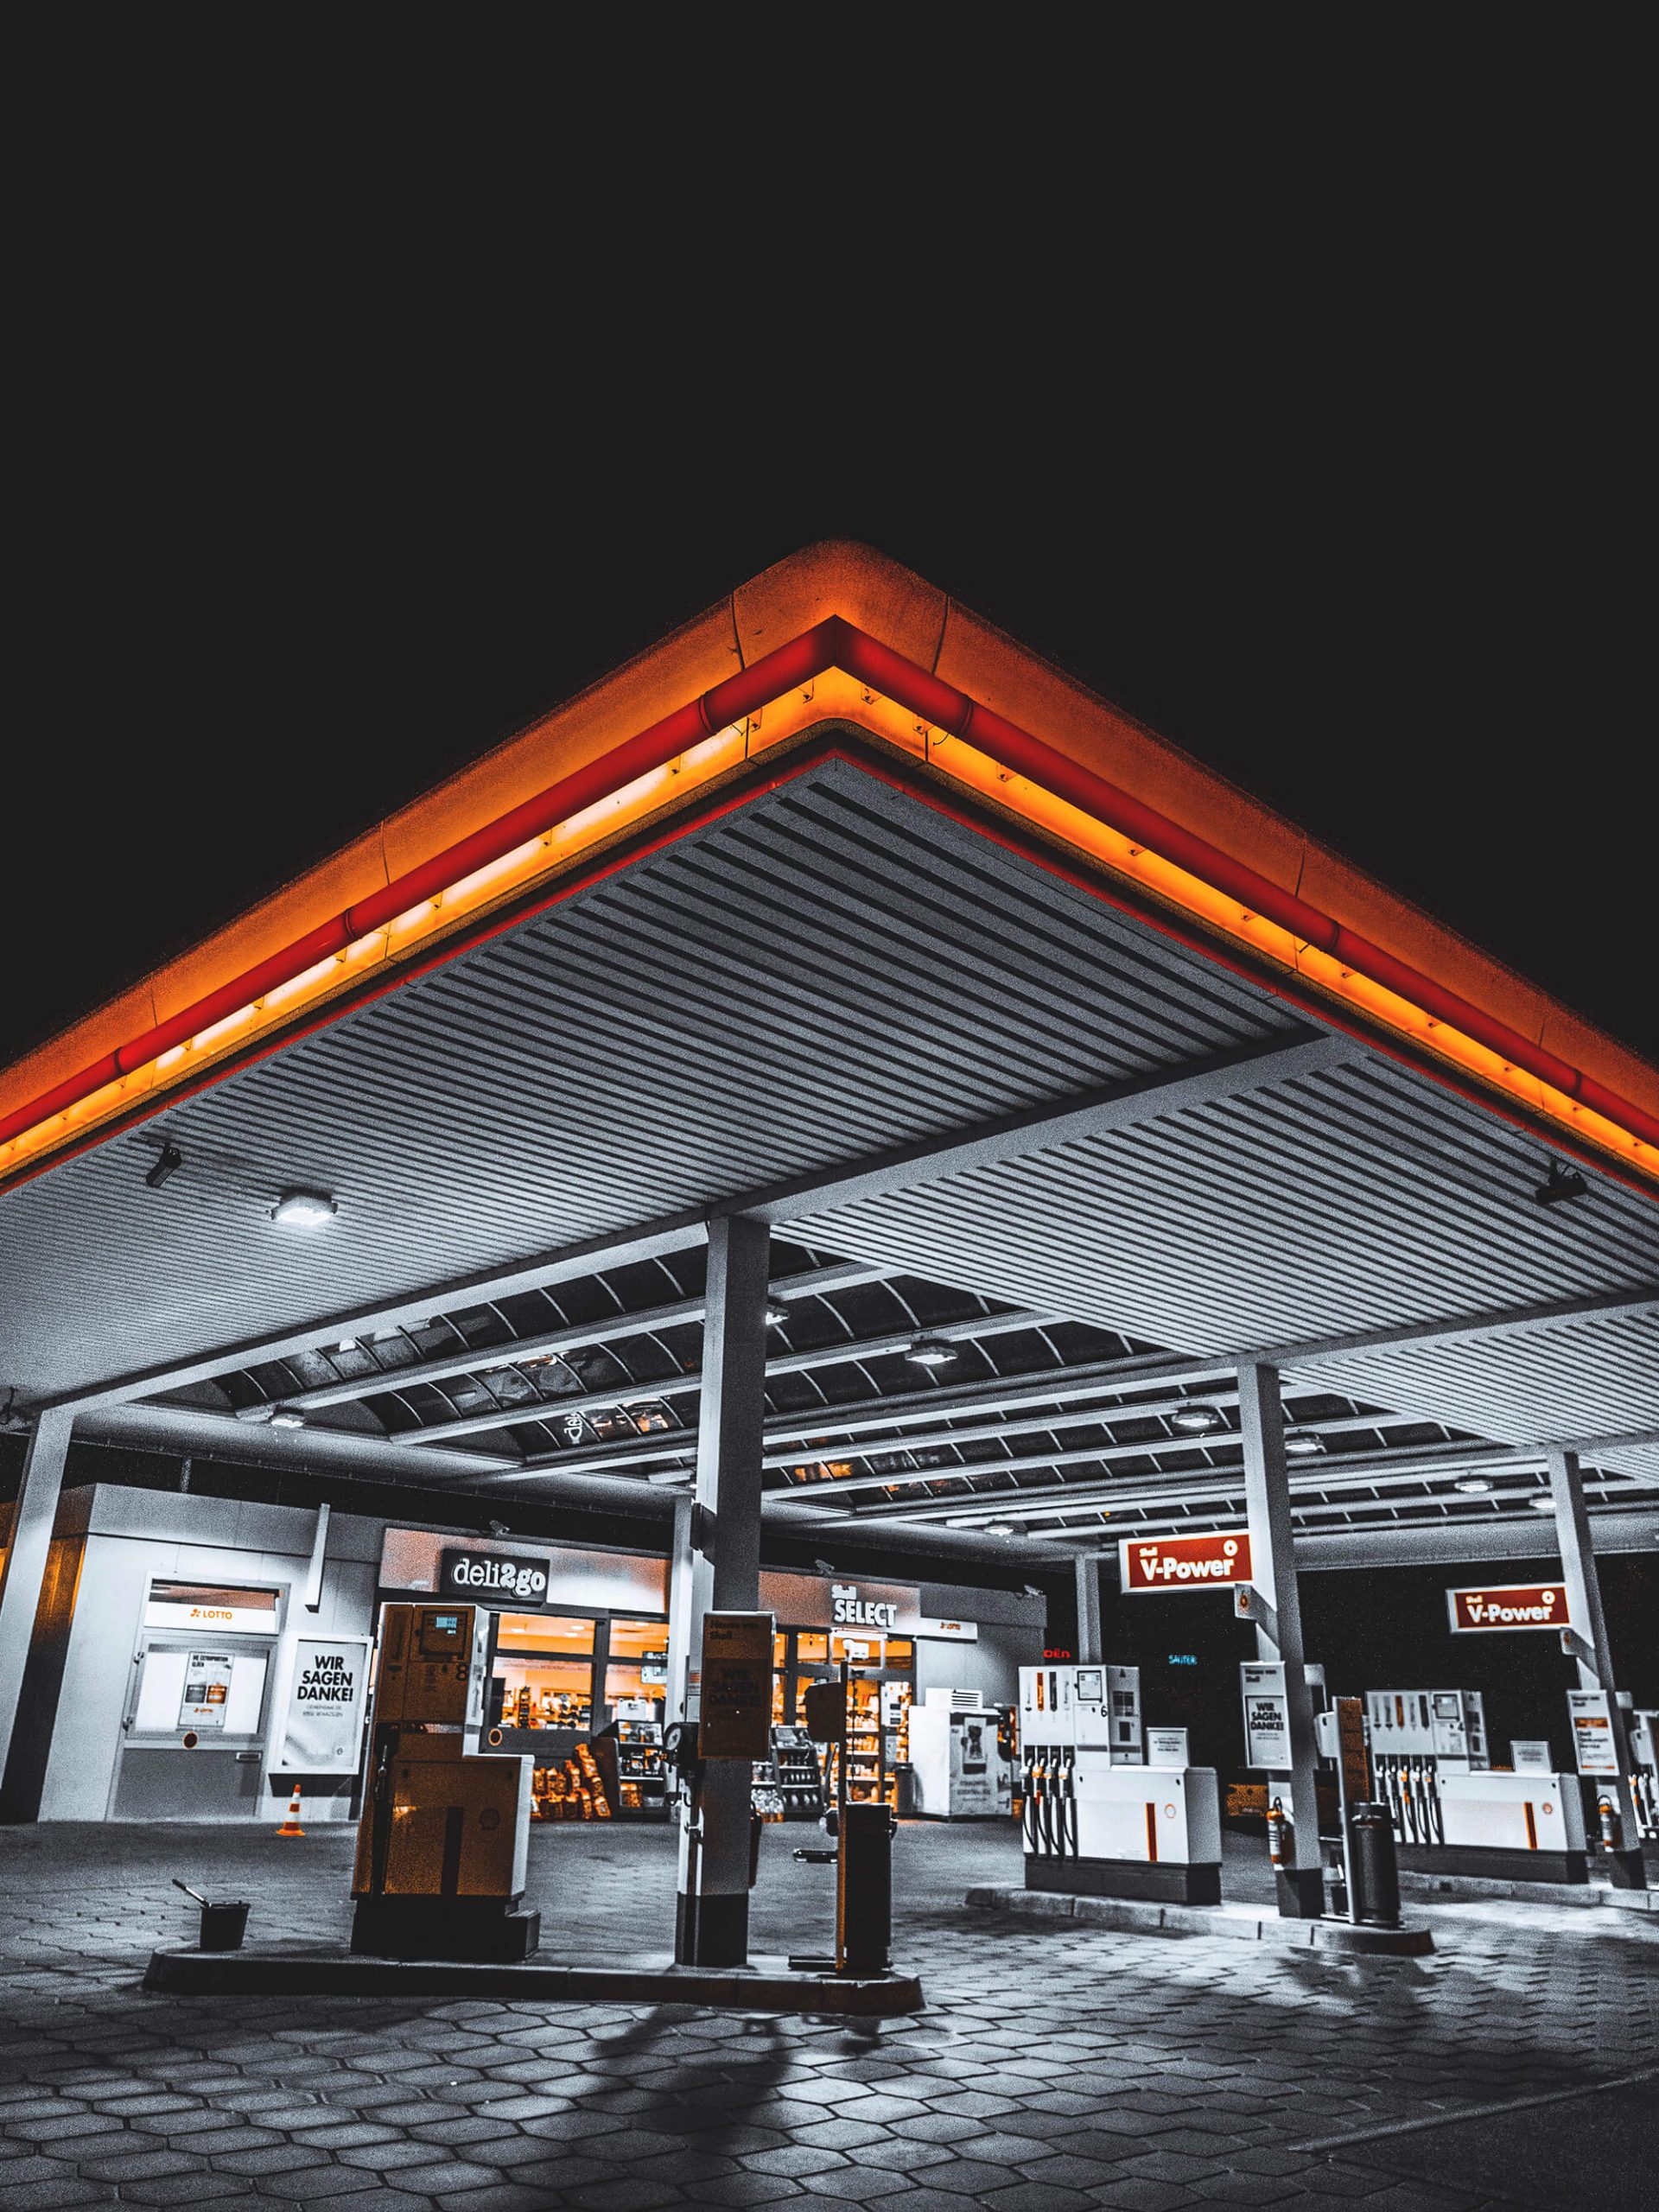 Well-lit gas station at night